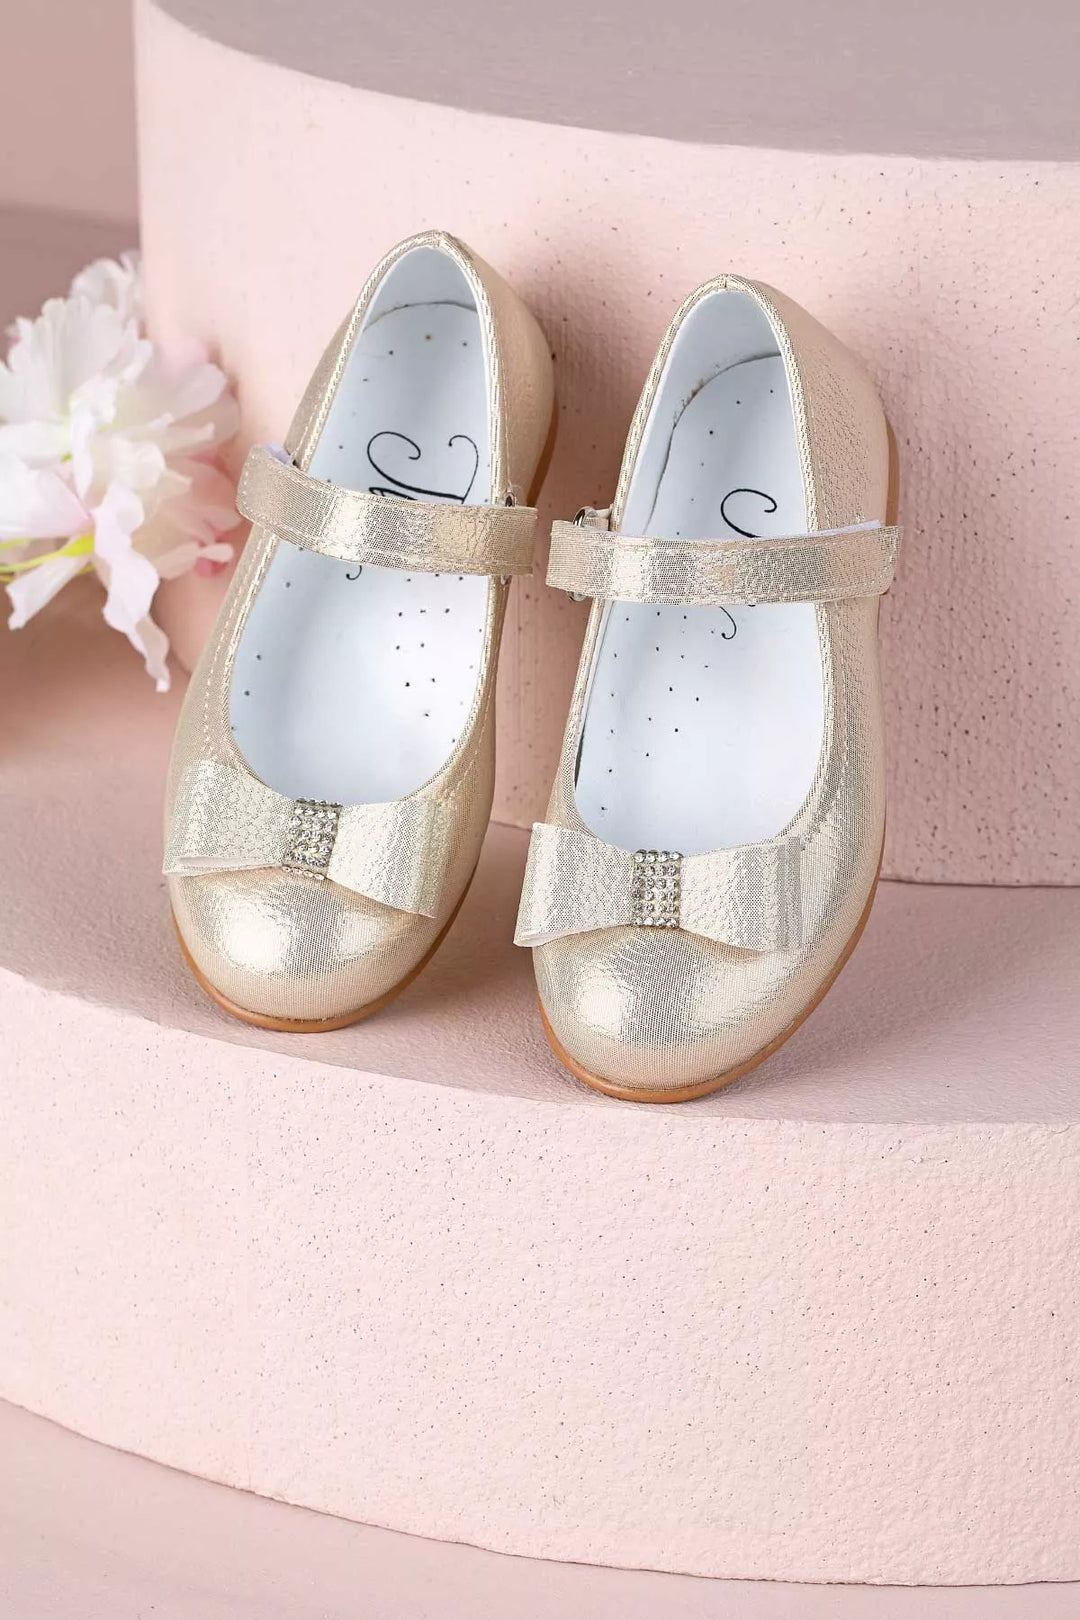 Gold toddler shoes that have crystal stone ornaments and bow tie